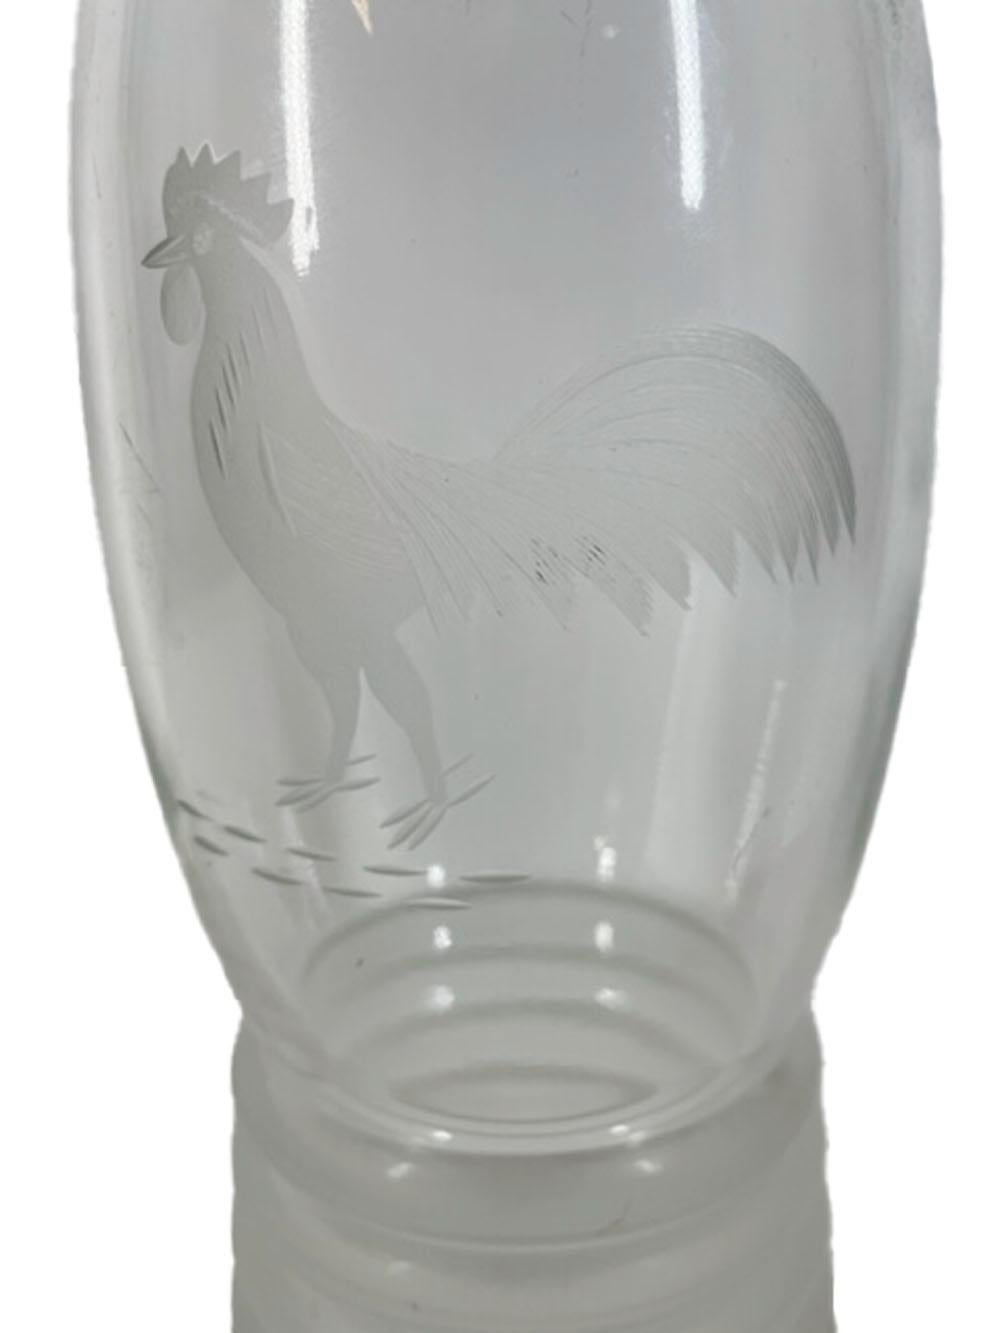 Art Deco clear glass cocktail shaker with center-pour chrome lid. The body of the shaker with a wheel cut image of a rooster above a flared, molded base of rings with a frosted surface.